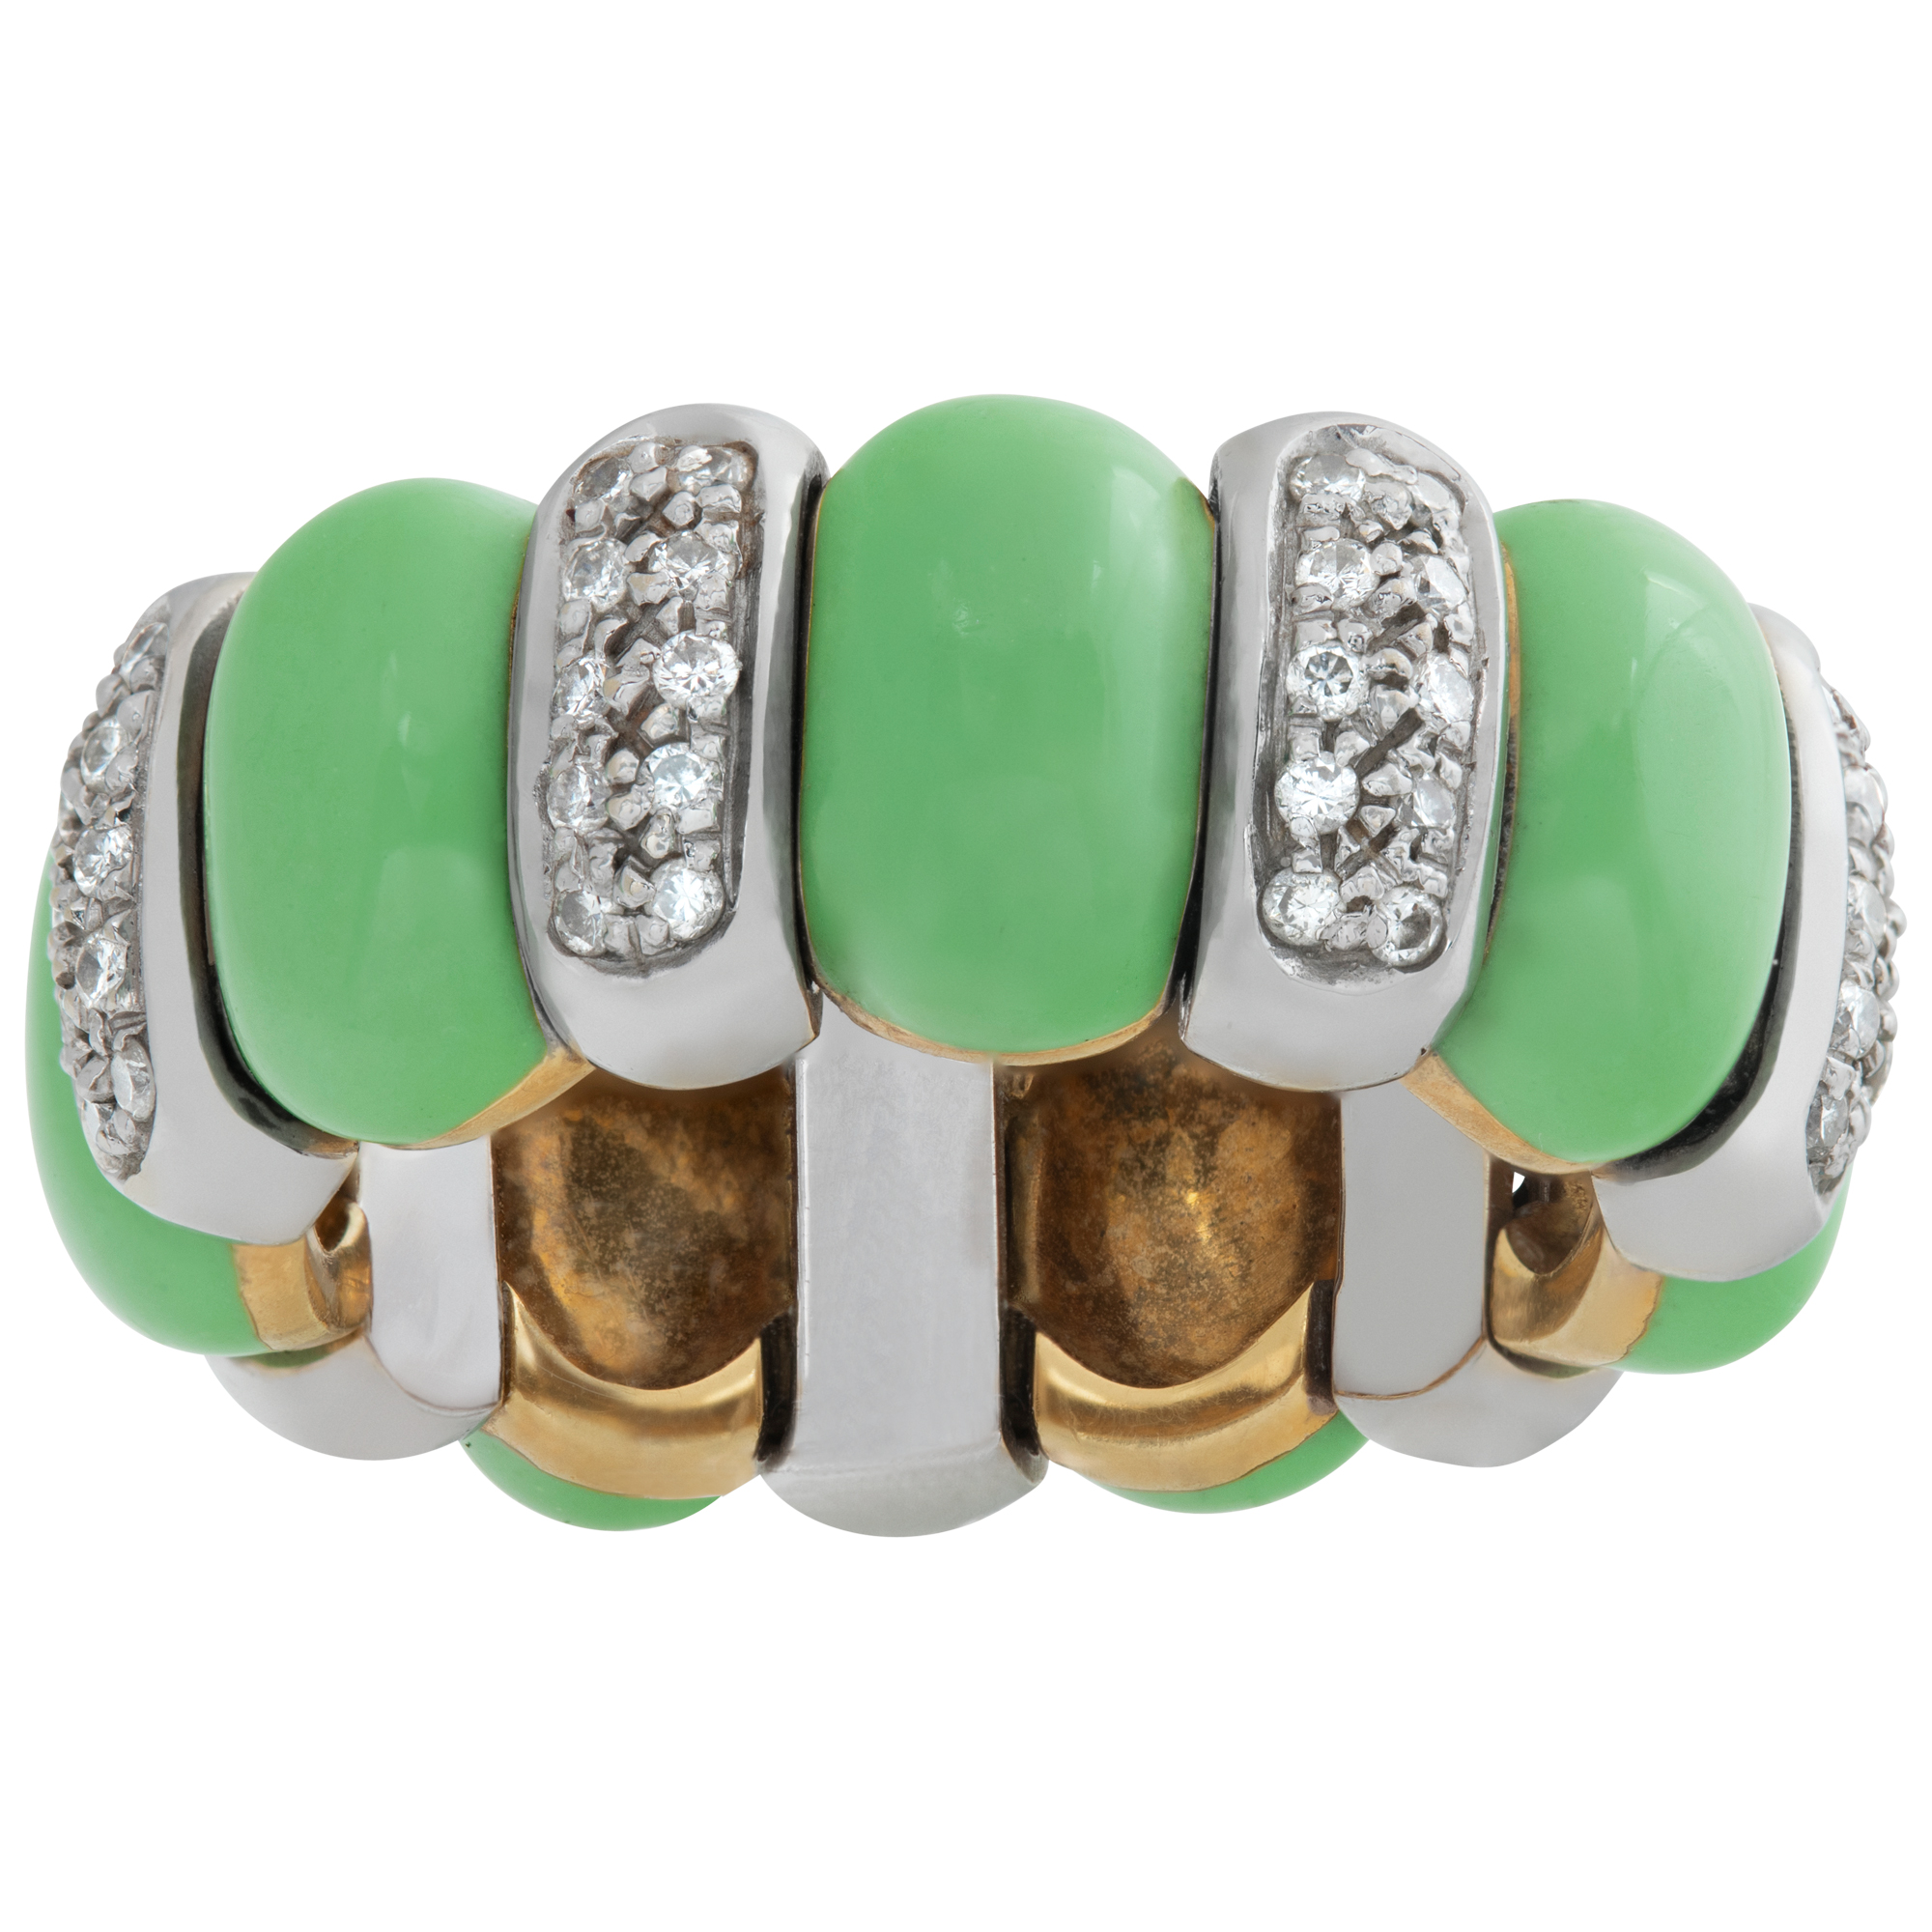 Designer signed "Valent" flexible eternity band with diamonds and cabochon green turquoise set in 18K white & yellow gold. image 1